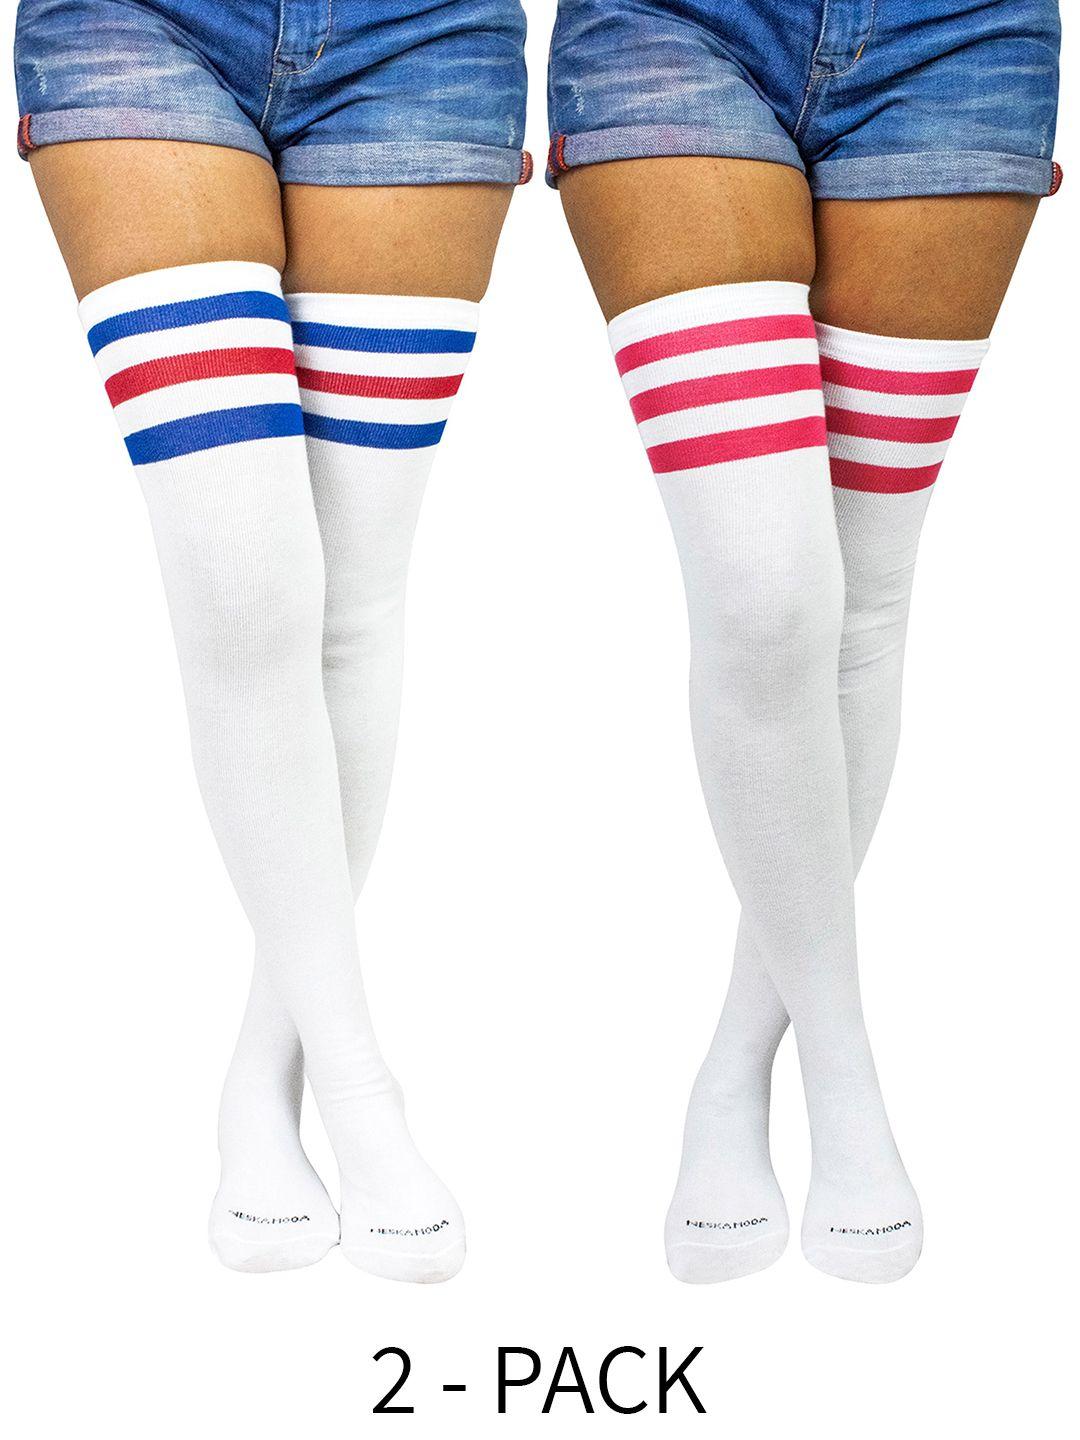 baesd pack of 2 striped cotton thigh-high stockings